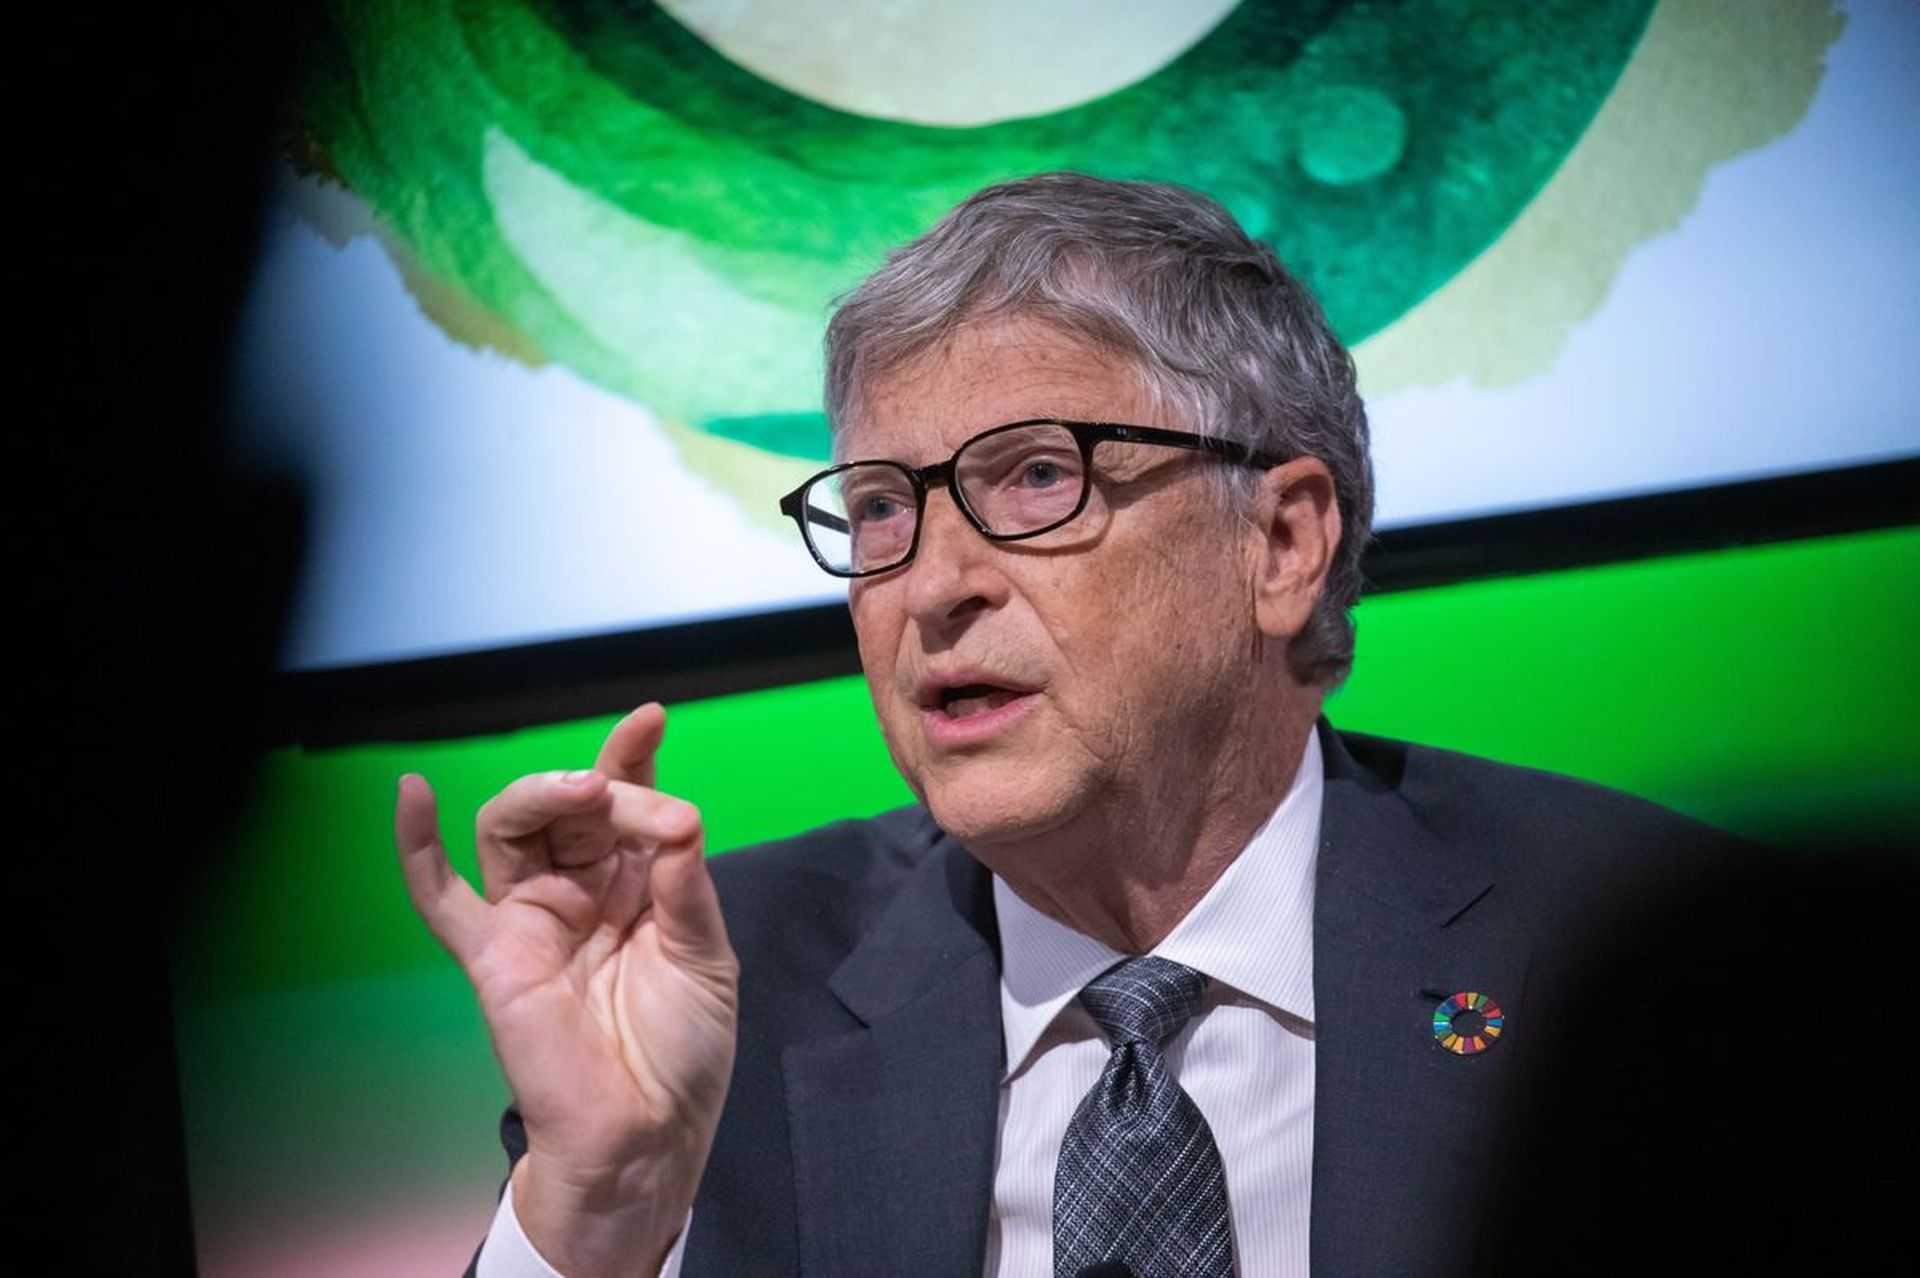 For around $1.32 billion, Bill Gates Heineken deal went through and he purchased a small part in Heineken Holding NV, the controlling shareholder of the...